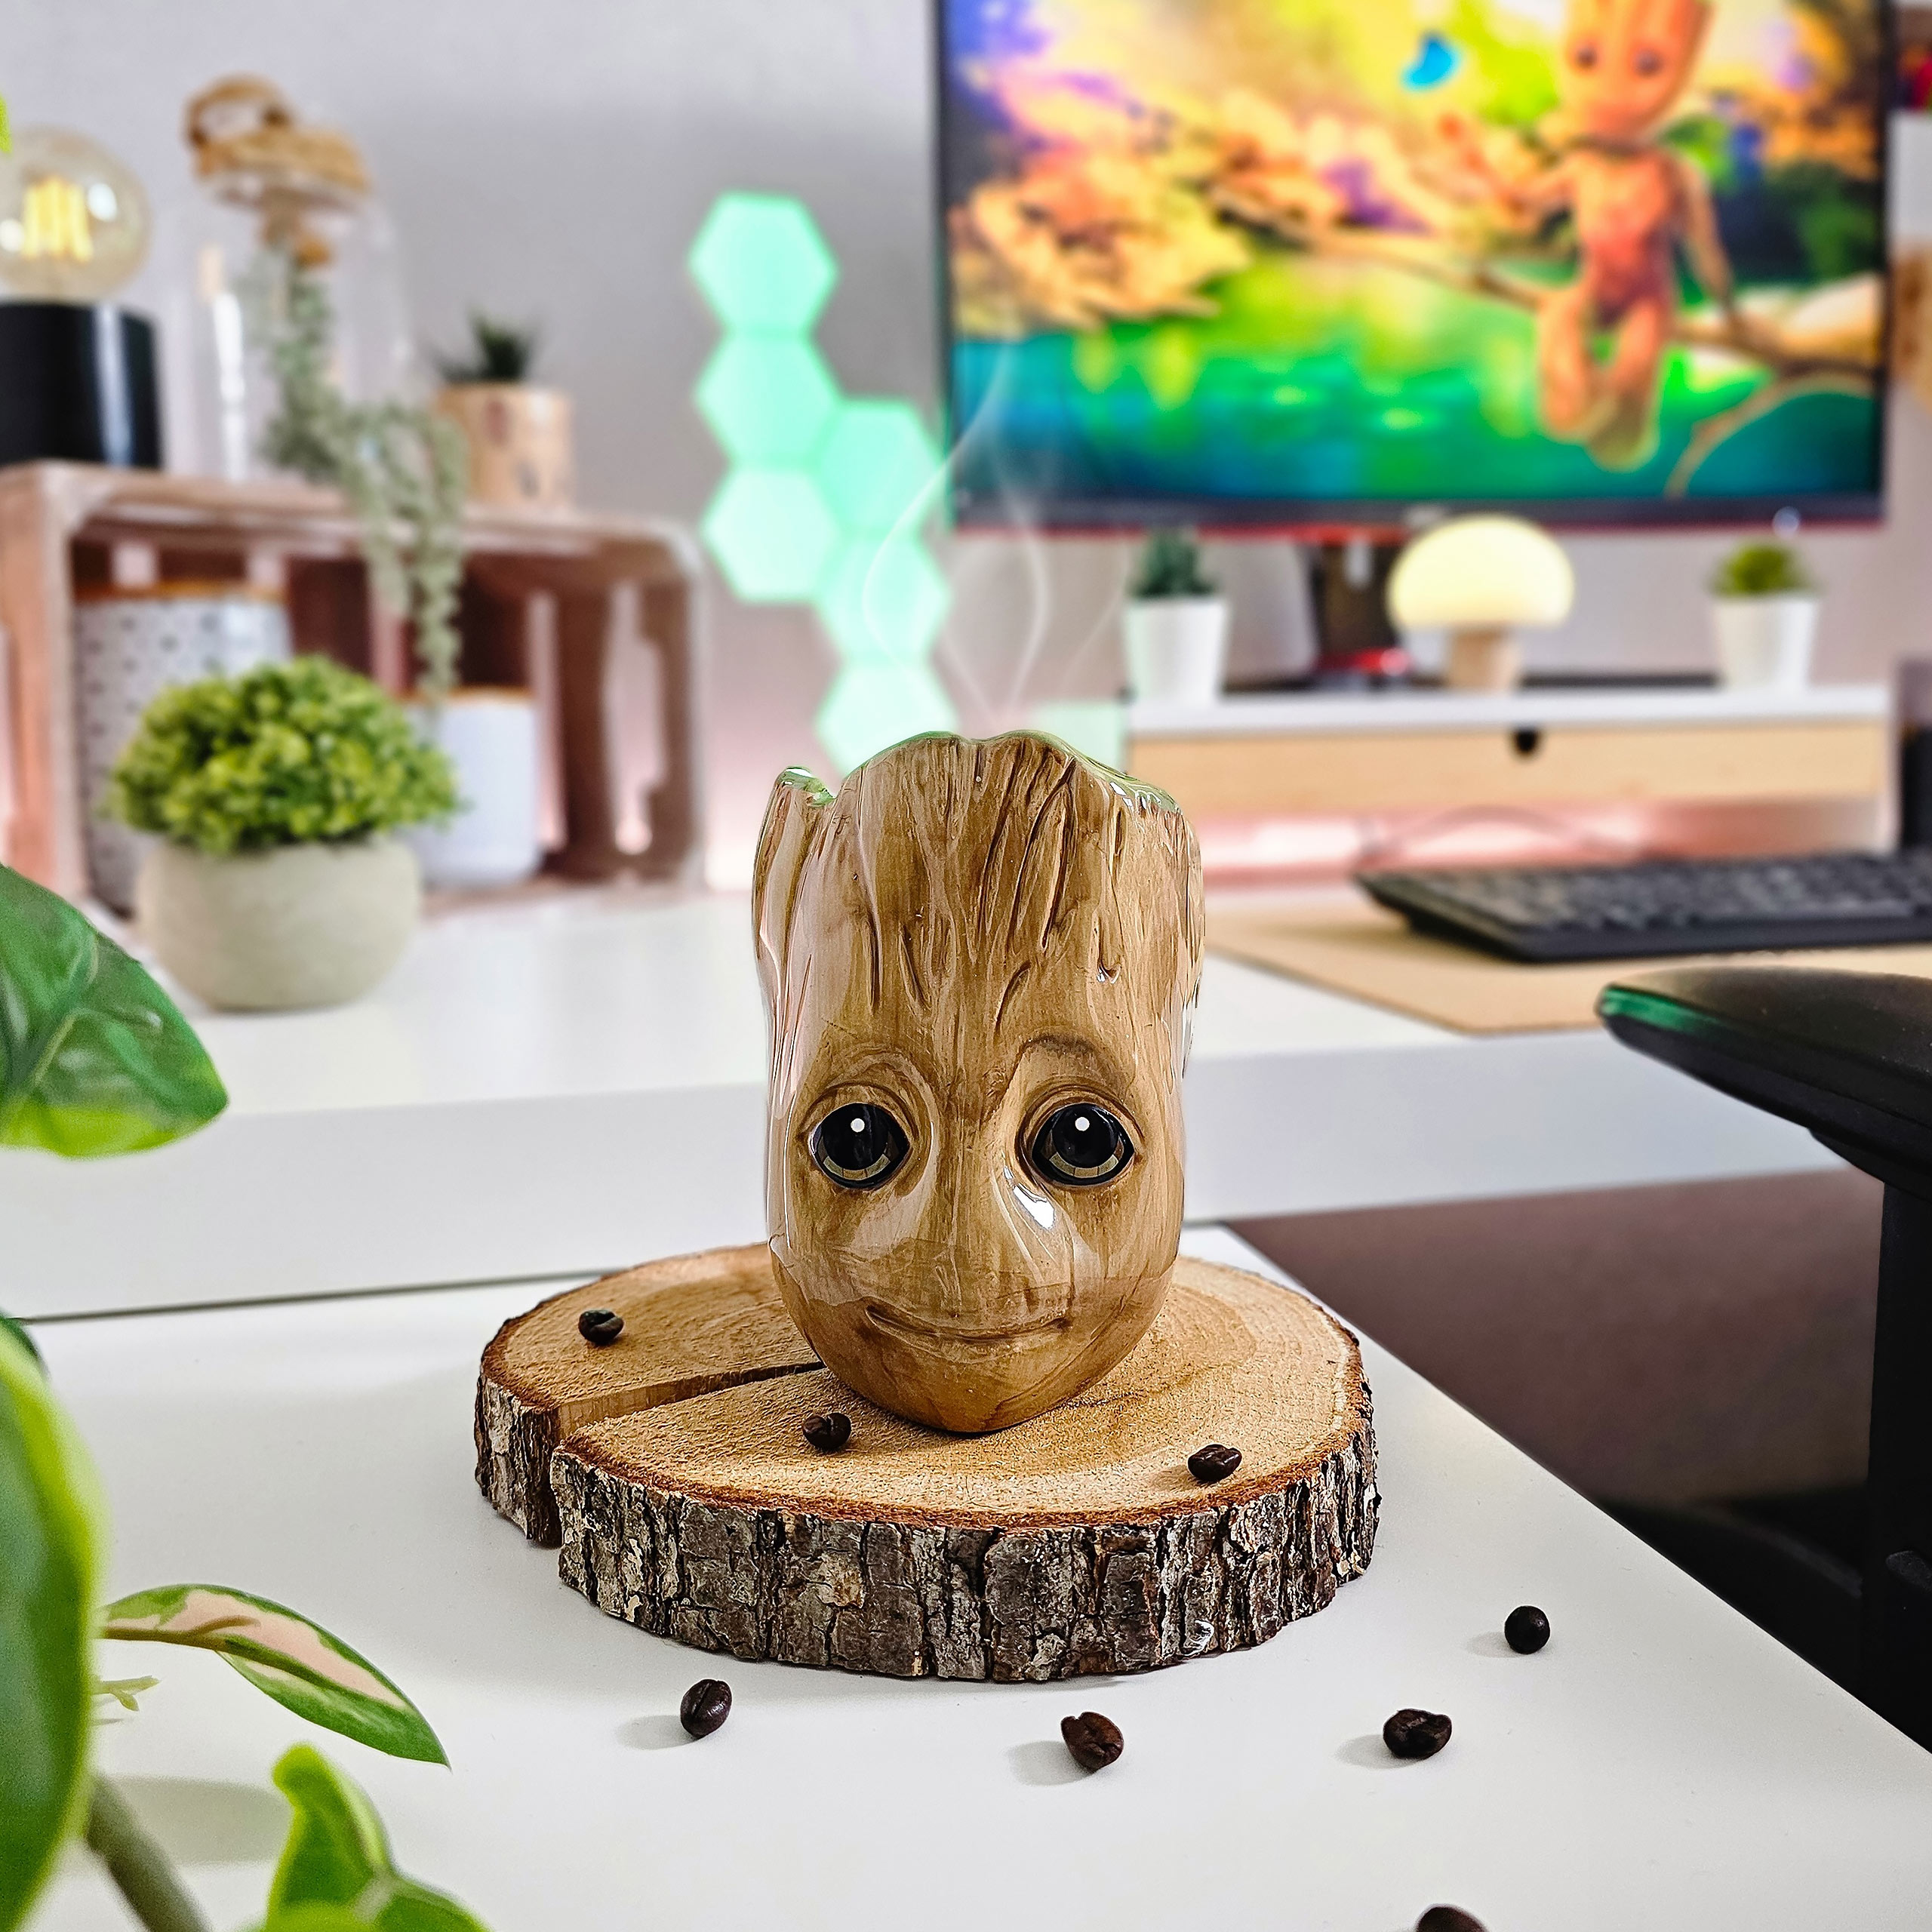 Baby Groot 3D Mok - Guardians of the Galaxy